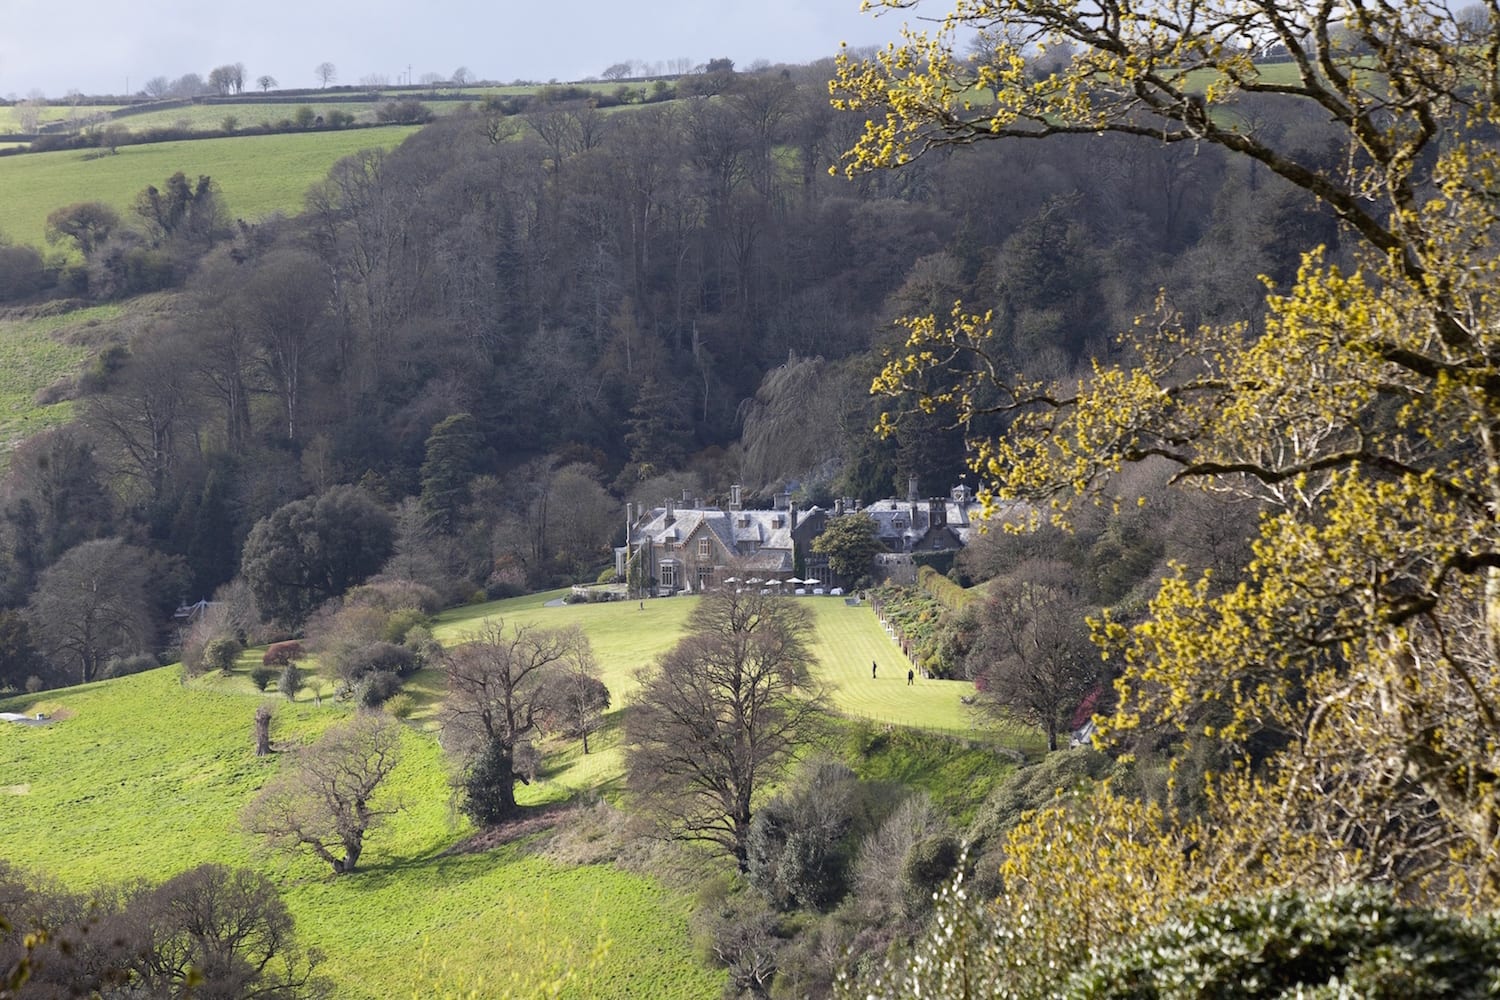 Endsleigh Hotel View from far